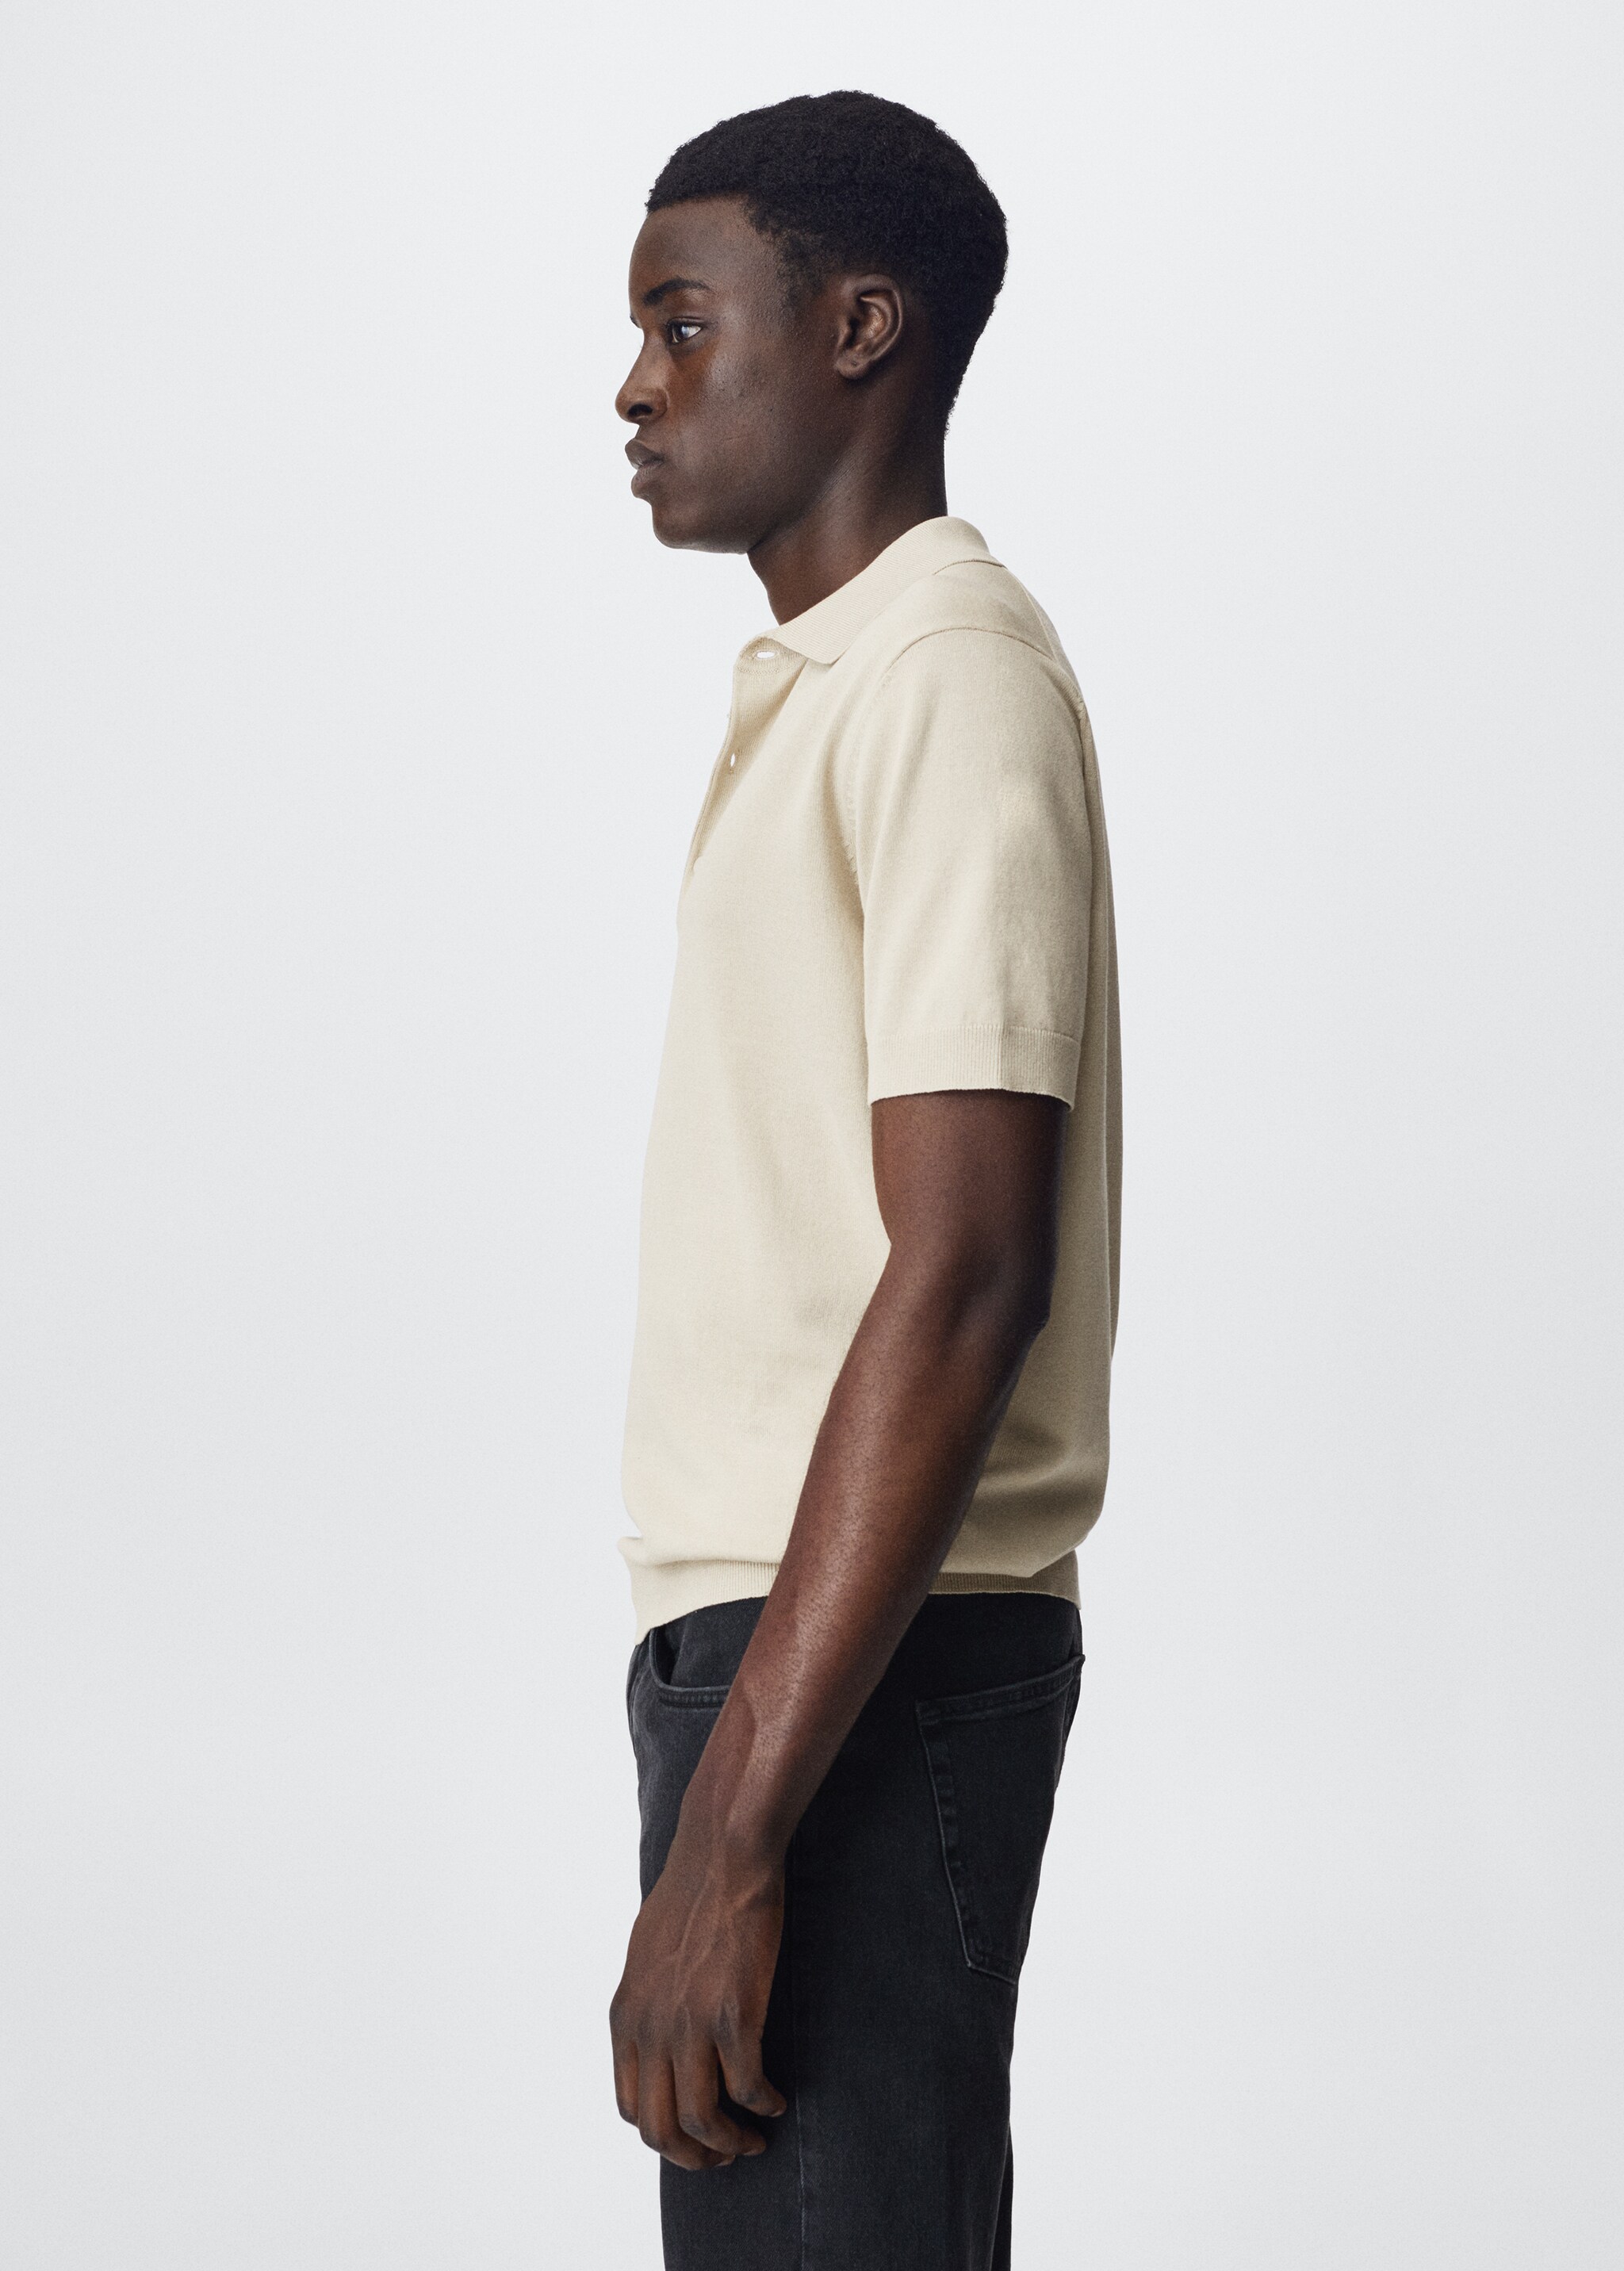 Knit cotton polo shirt - Details of the article 2